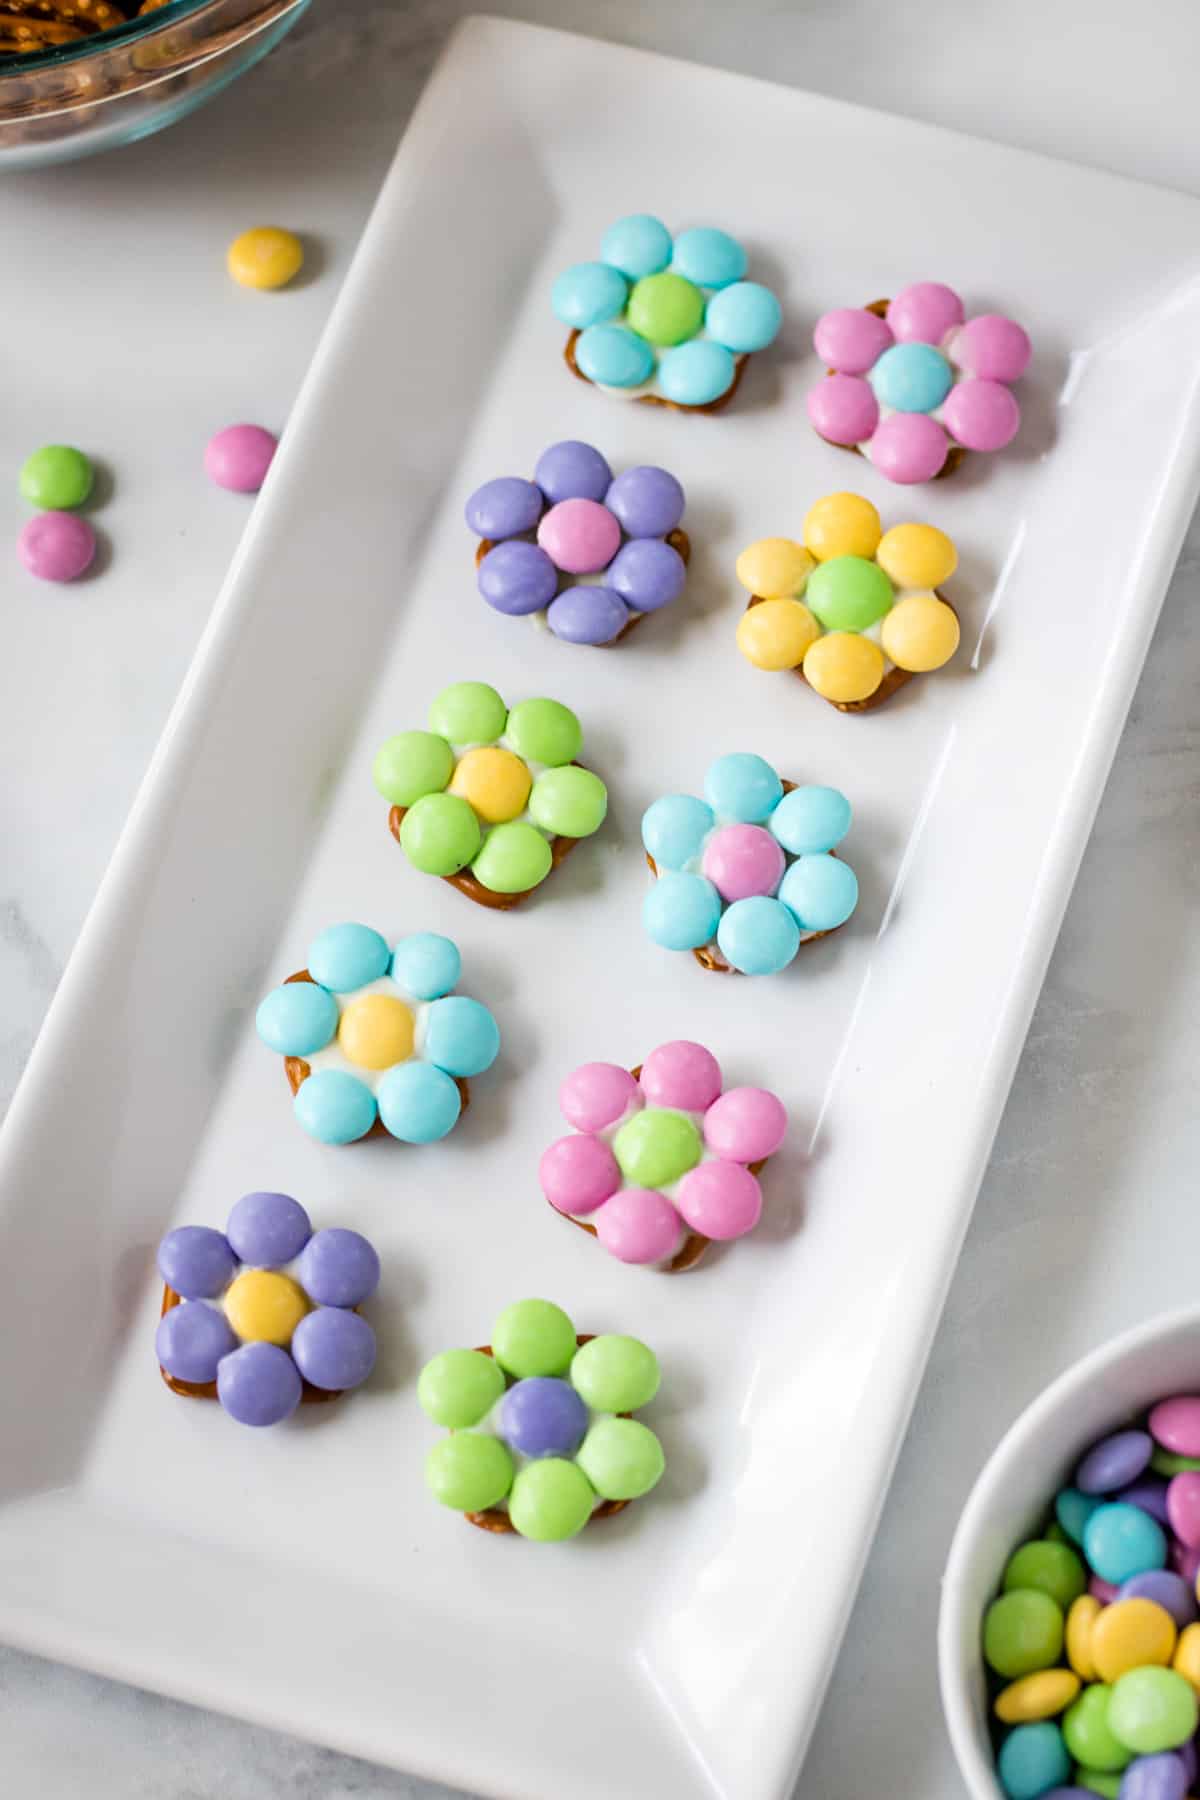 Pastel-colored flowers made of M&Ms and pretzels on a white serving plate. Bowls of more M&Ms and pretzels are next to platter.